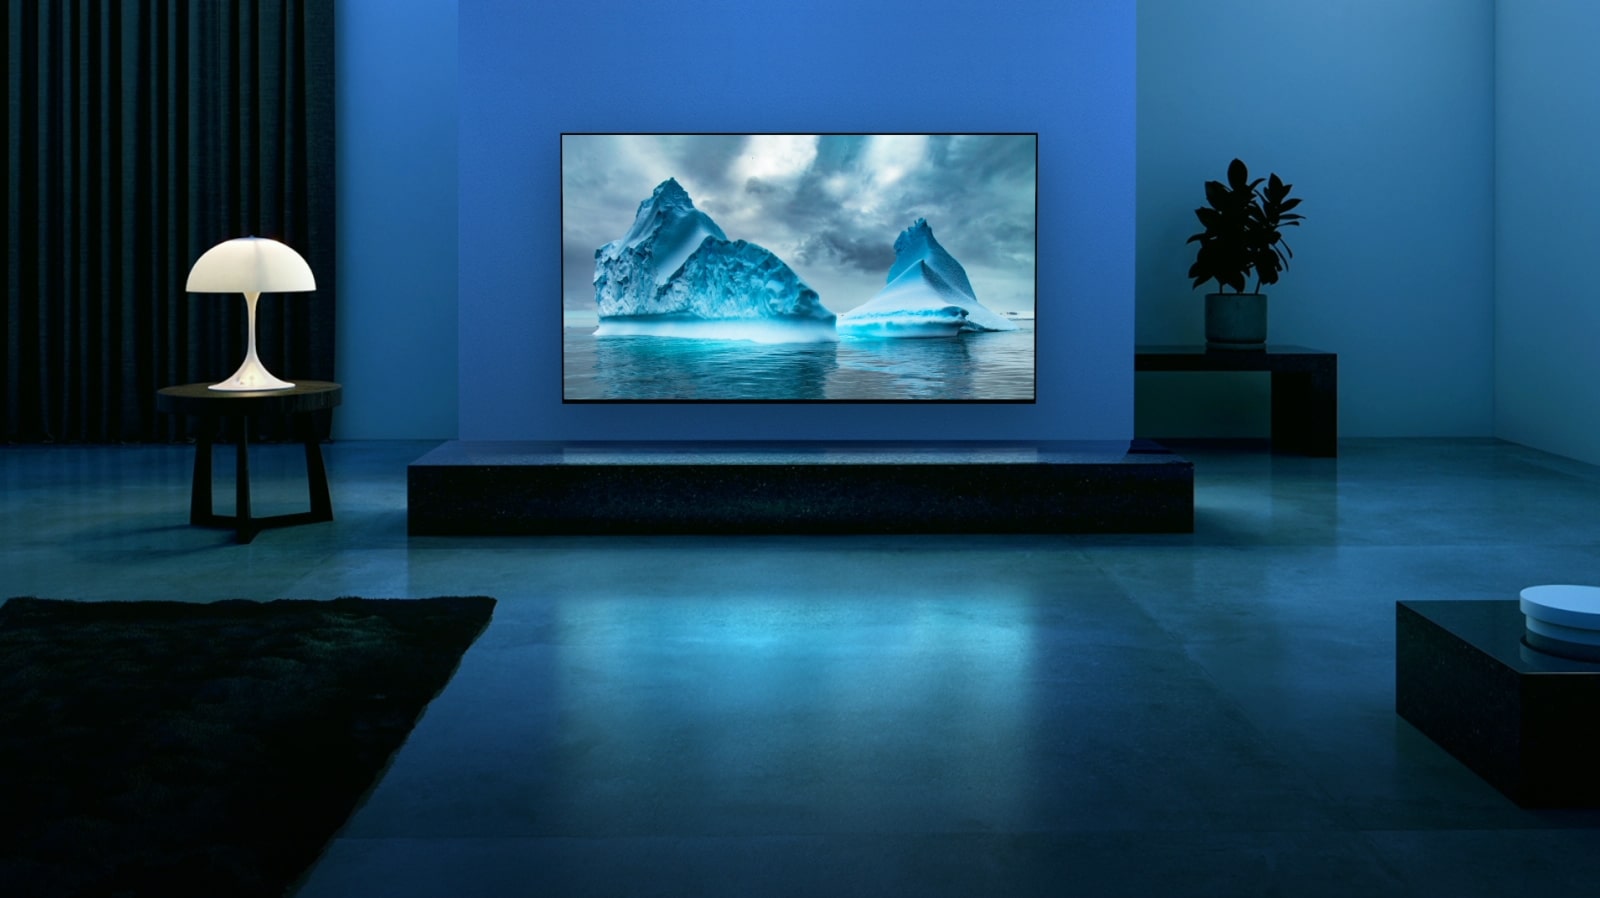 A blue neon outline moves across an image of a blue glacier. The camera zooms out to reveal a blue glacier on the TV screen. The TV is located in the spacious living room with a blue background.